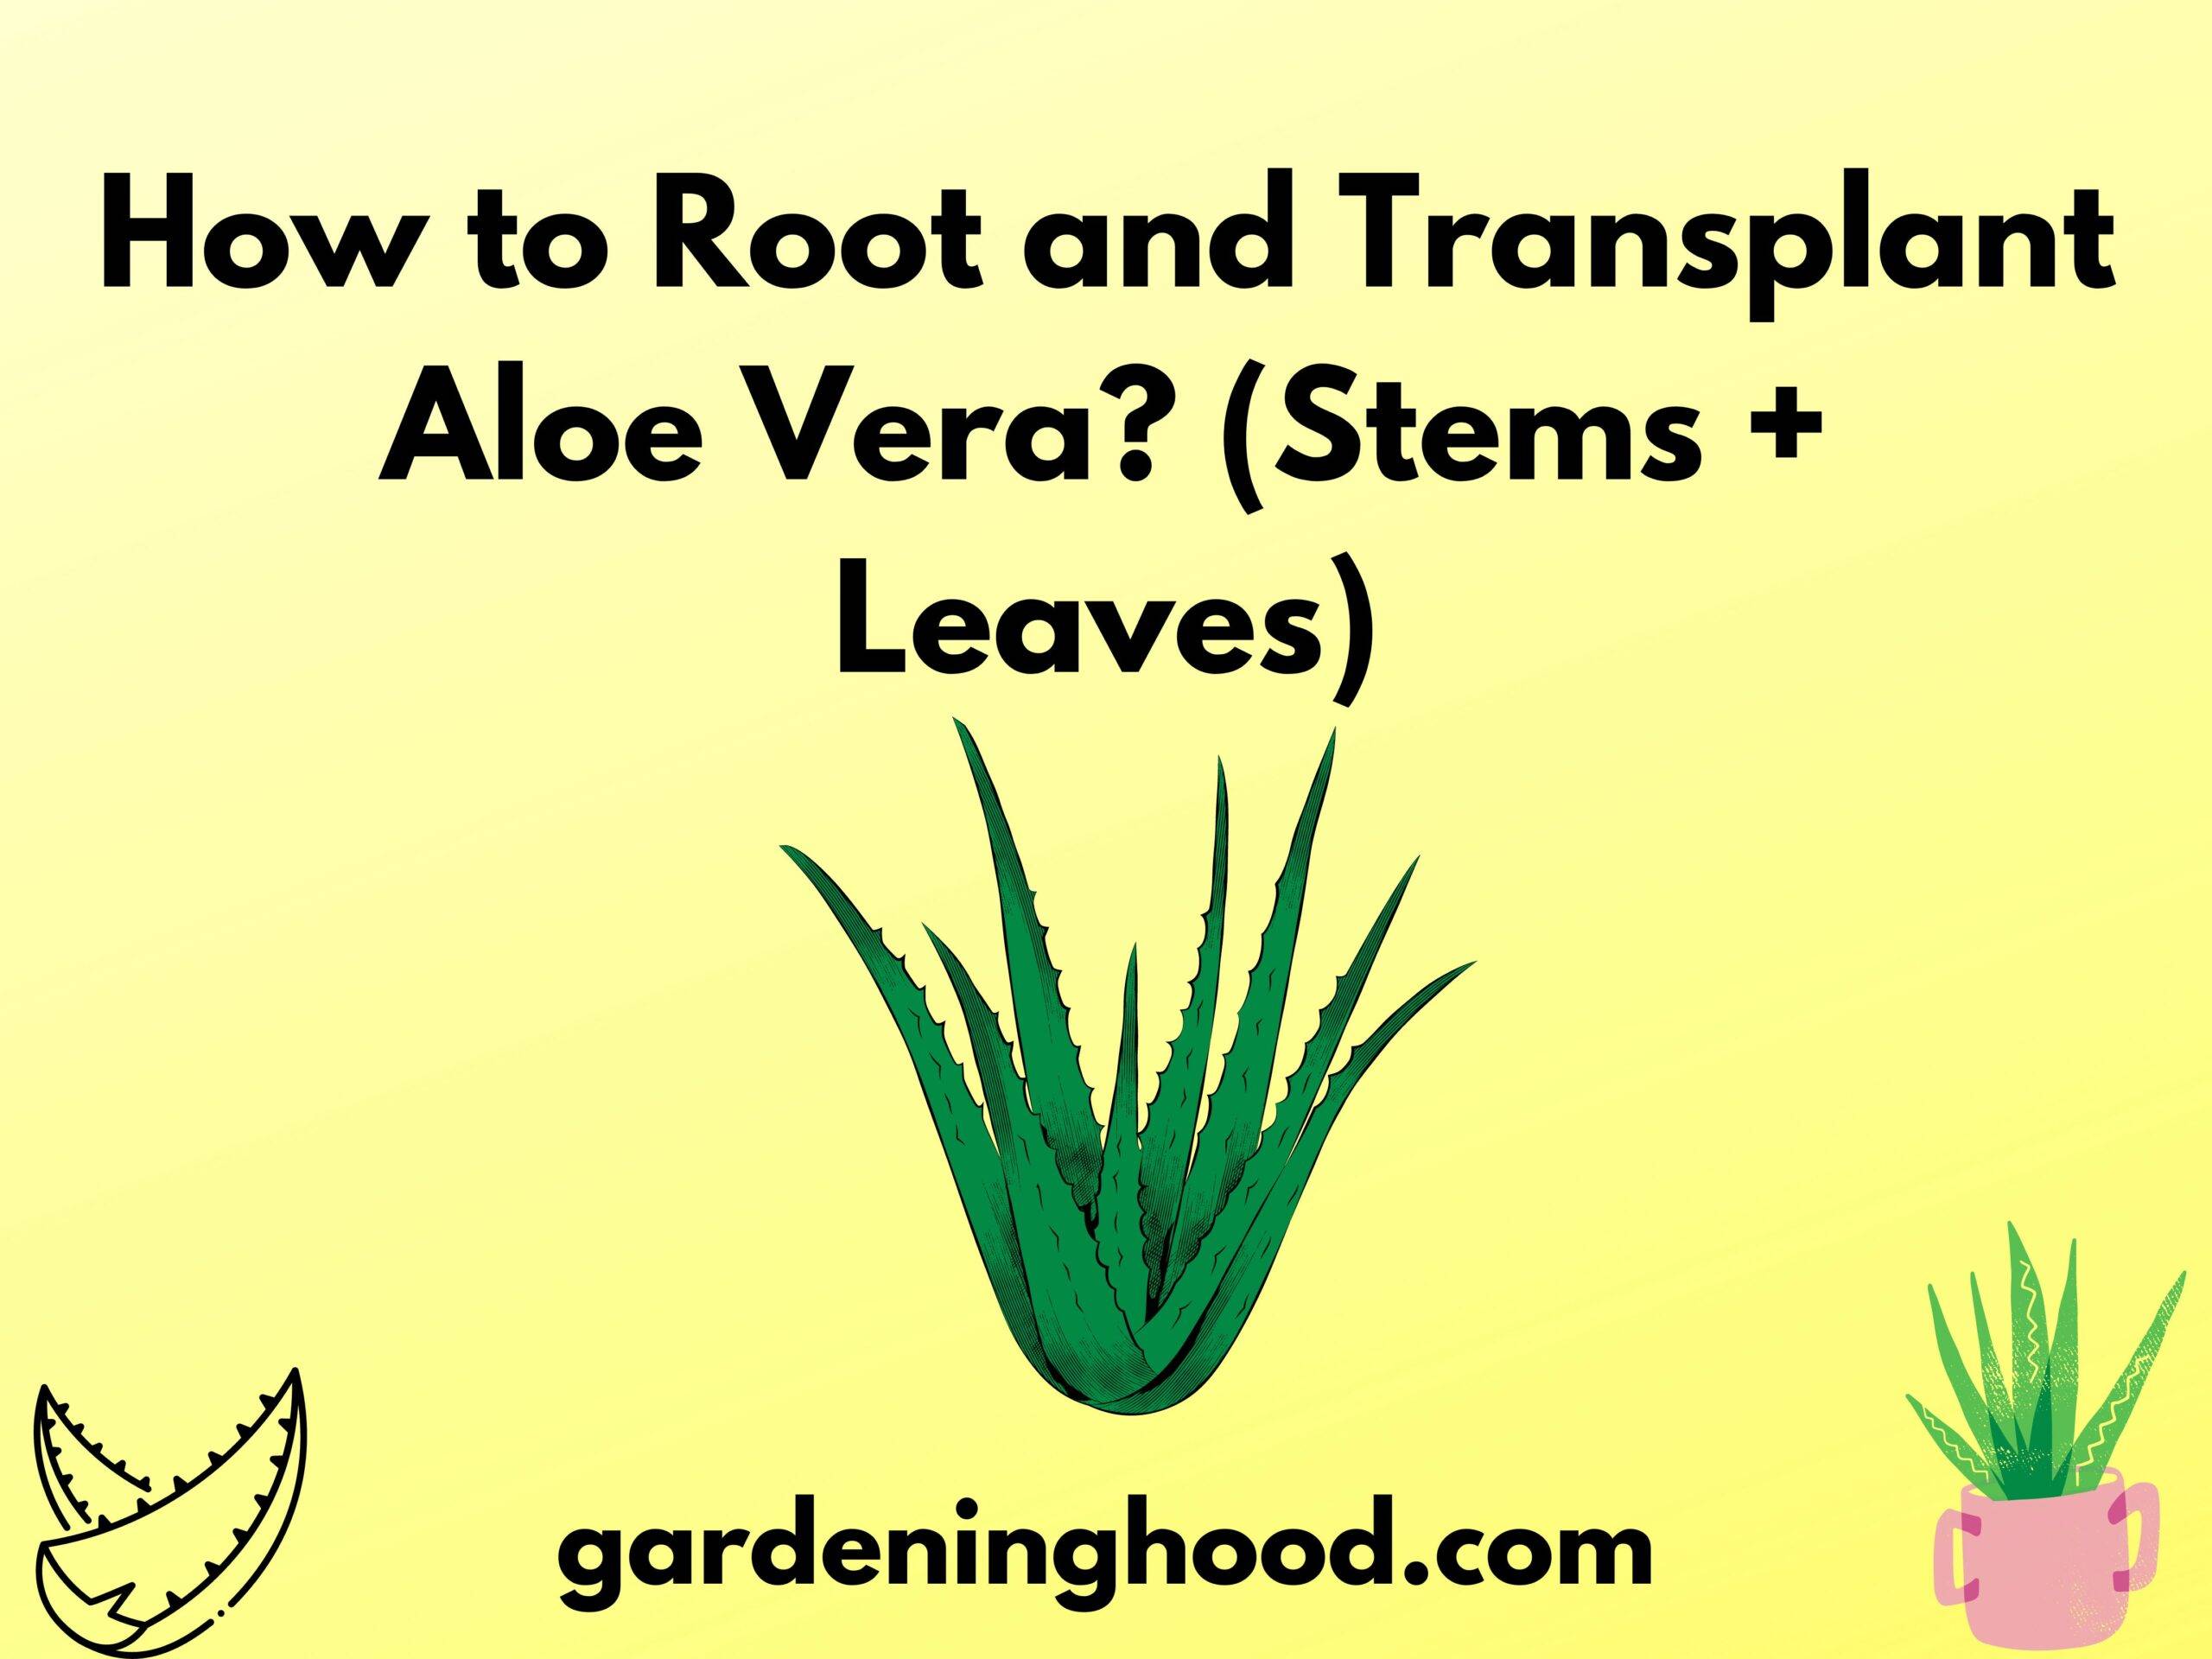 How to Root and Transplant Aloe Vera? (Stems + Leaves)